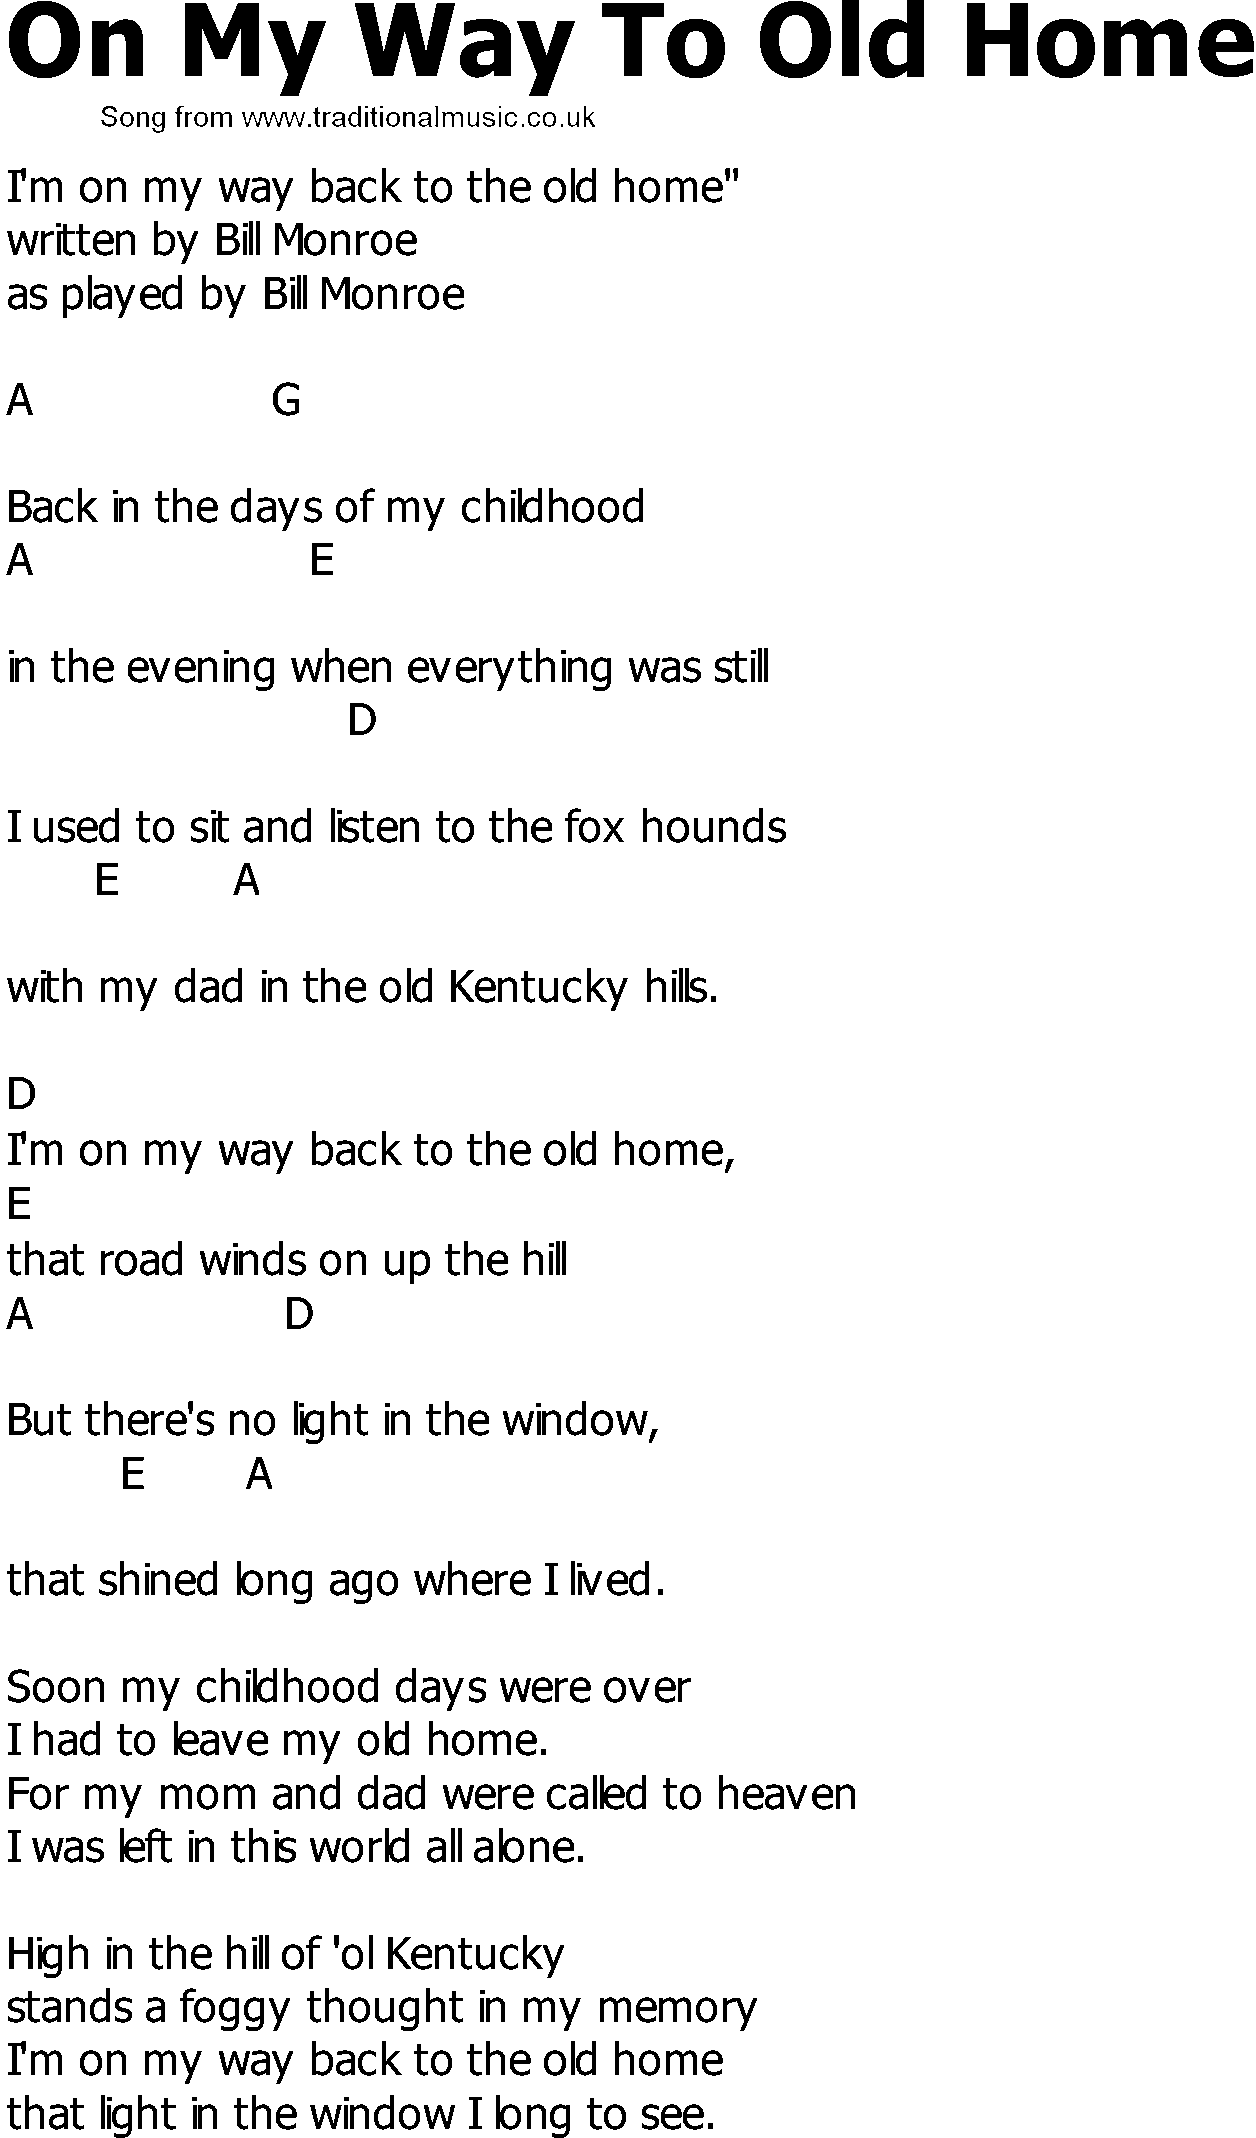 Old Country song lyrics with chords - On My Way To Old Home